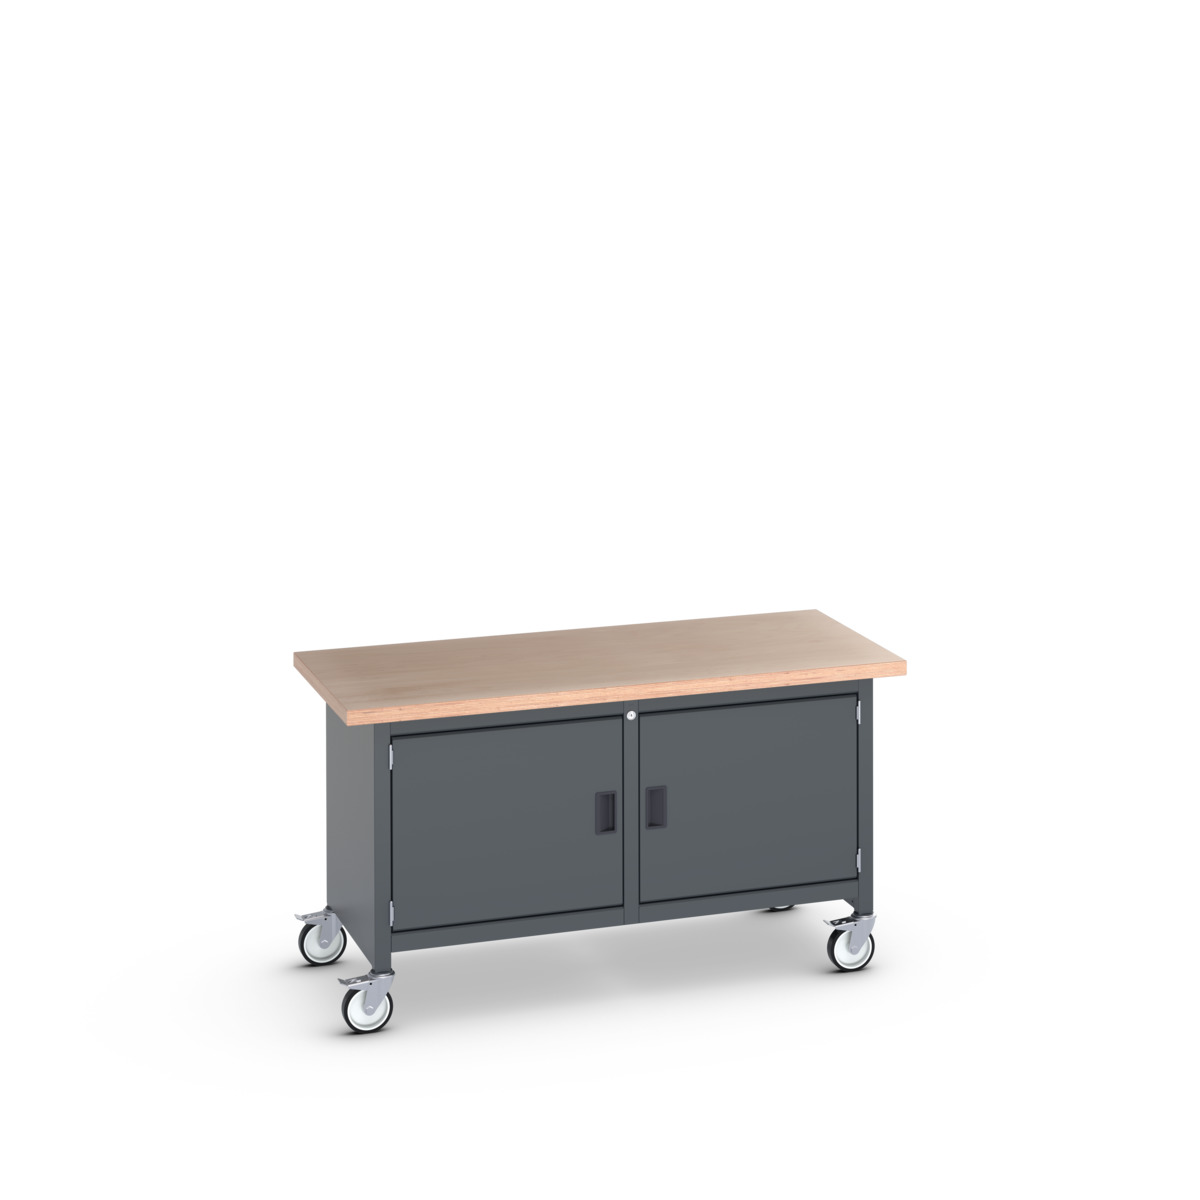 41002097.77V - cubio mobile storage bench (mpx)